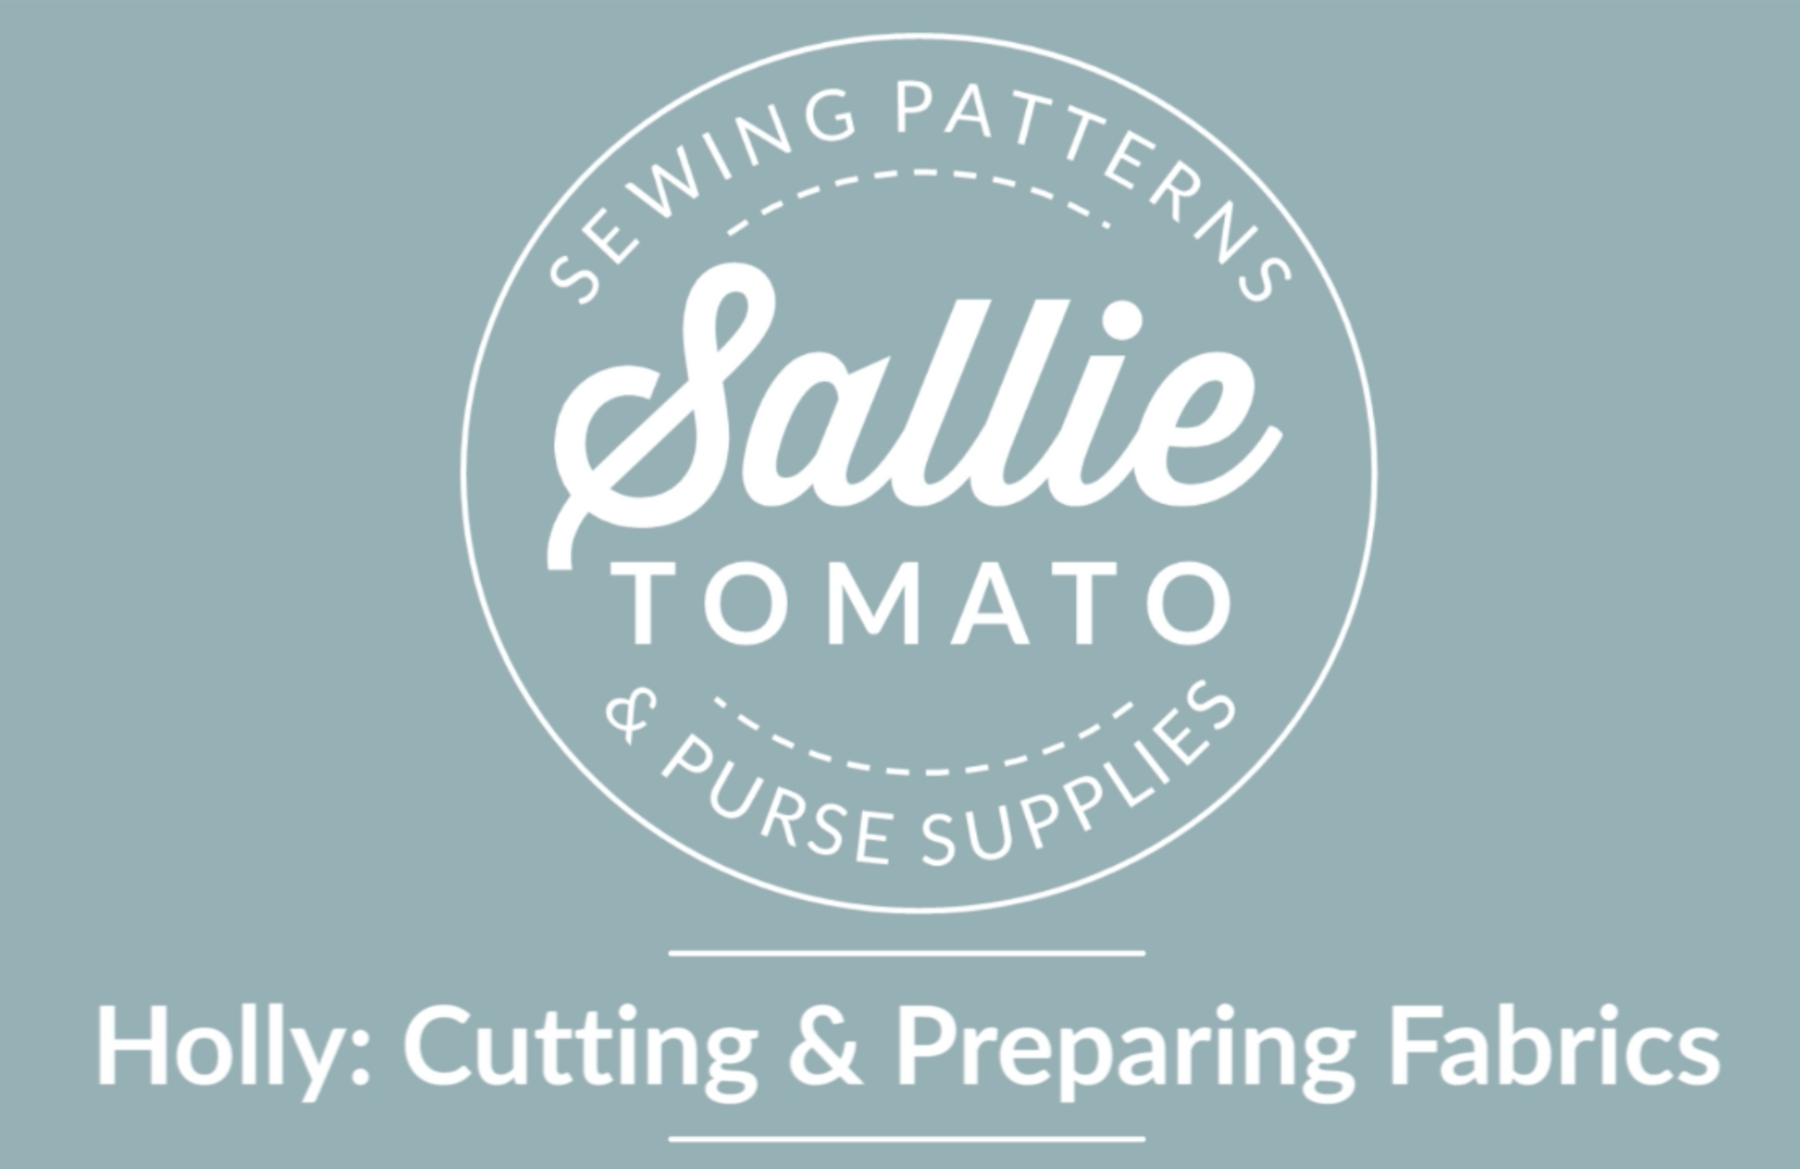 Magnetic Snap Instructions – Sallie Tomato